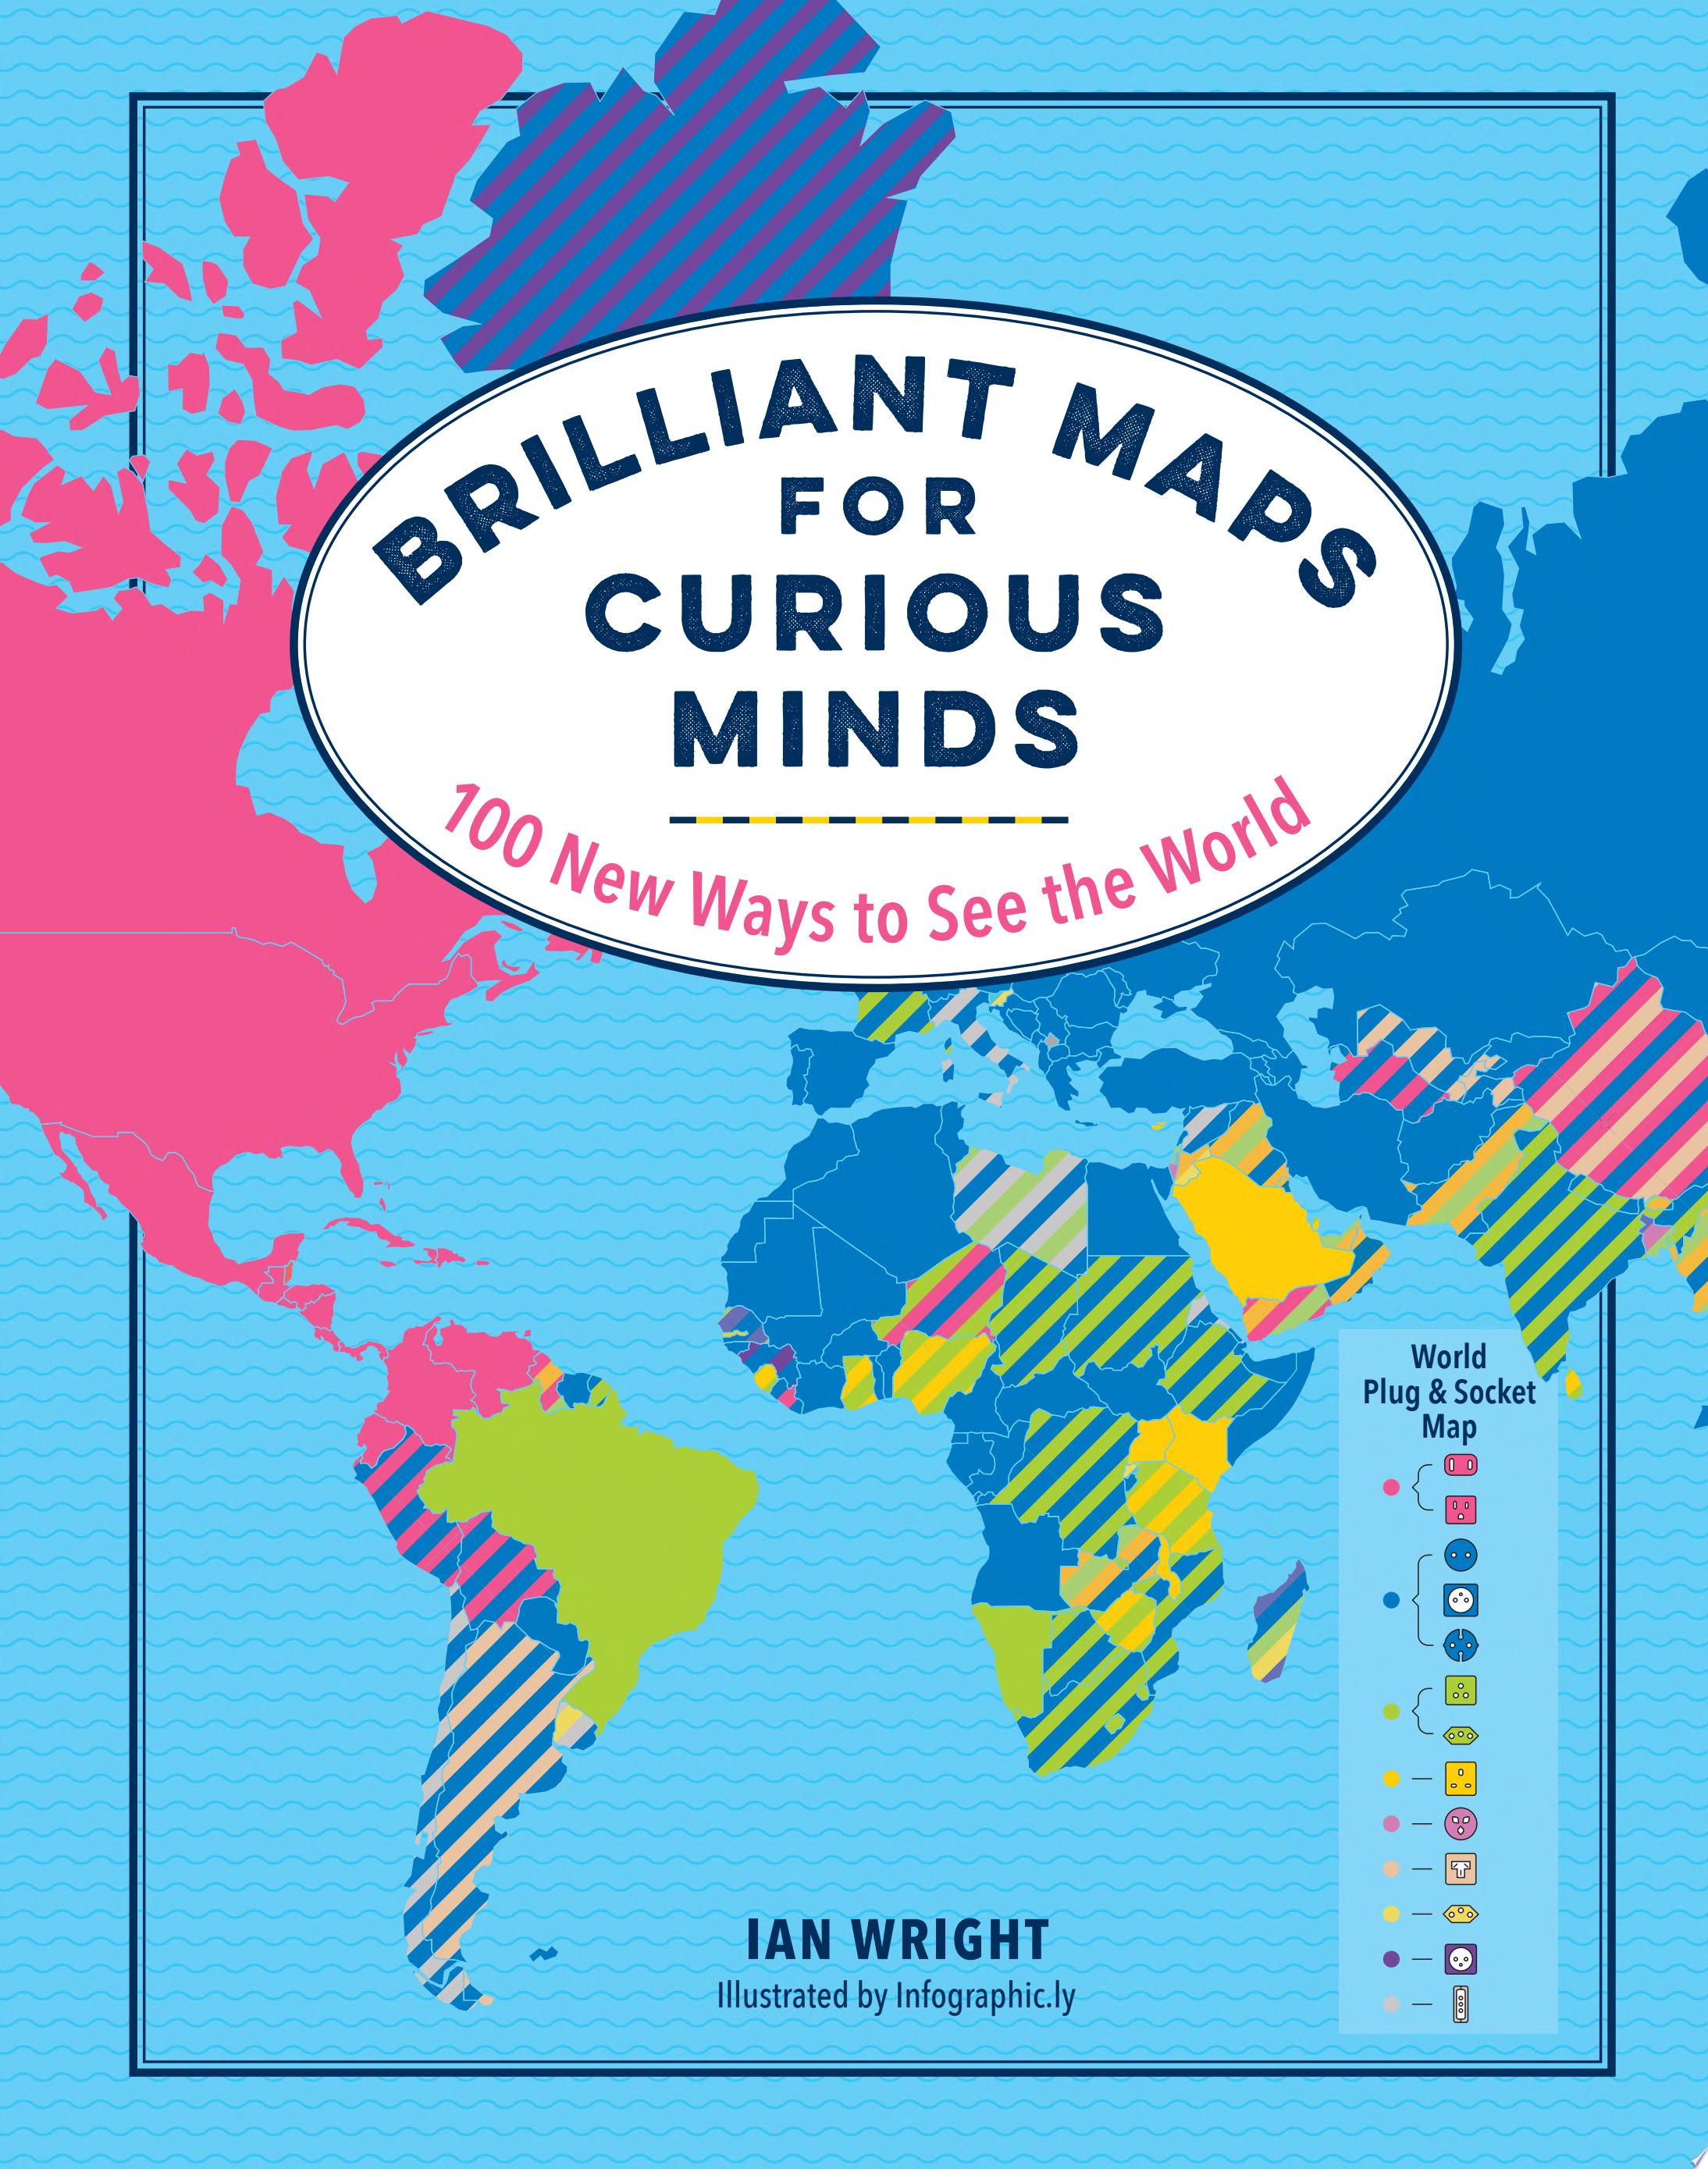 Image for "Brilliant Maps for Curious Minds"